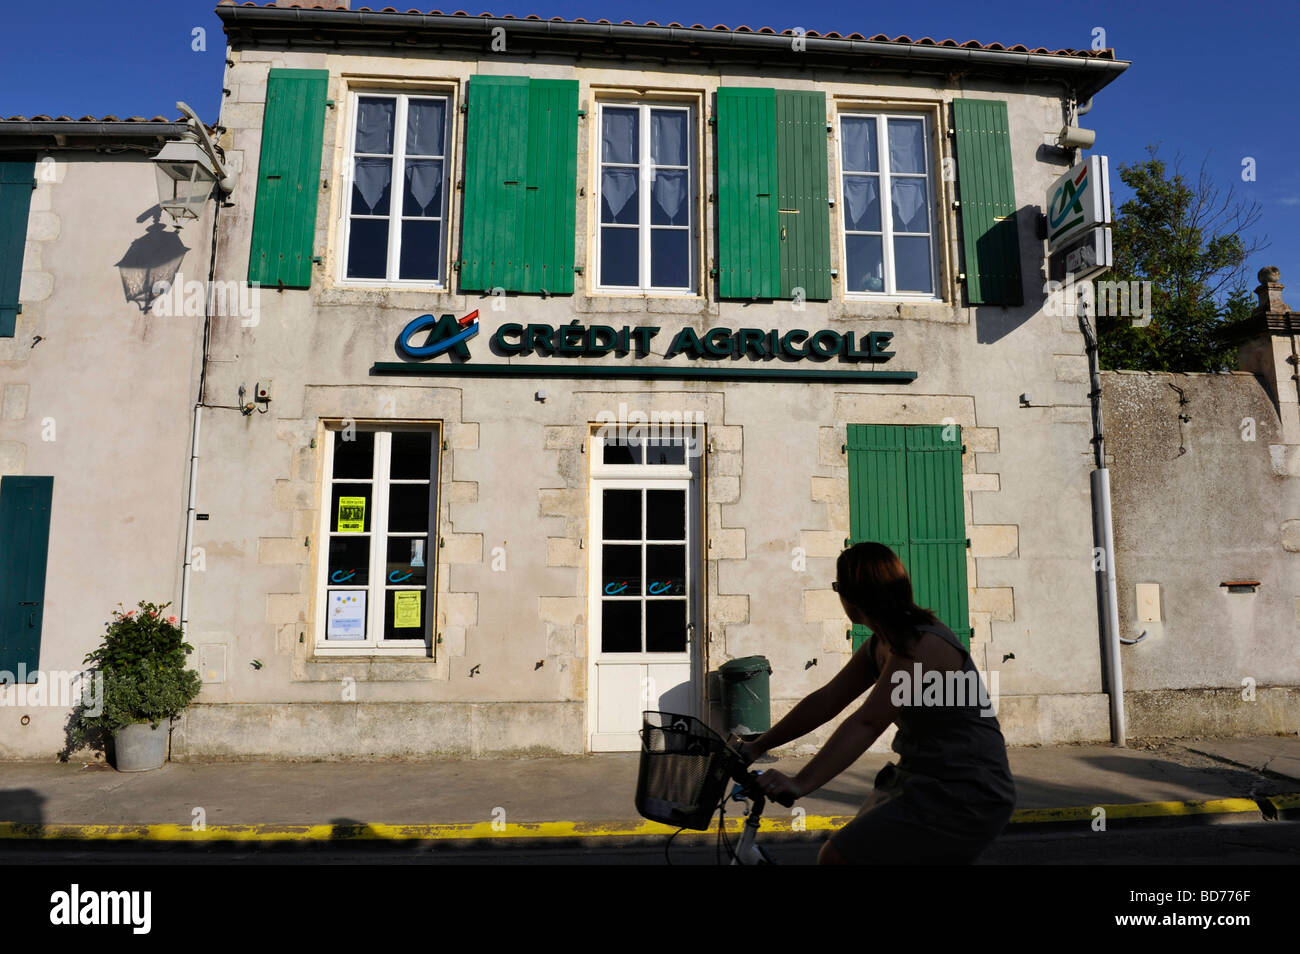 holiday, France, Ille de Re, bank credit agricole Stock Photo